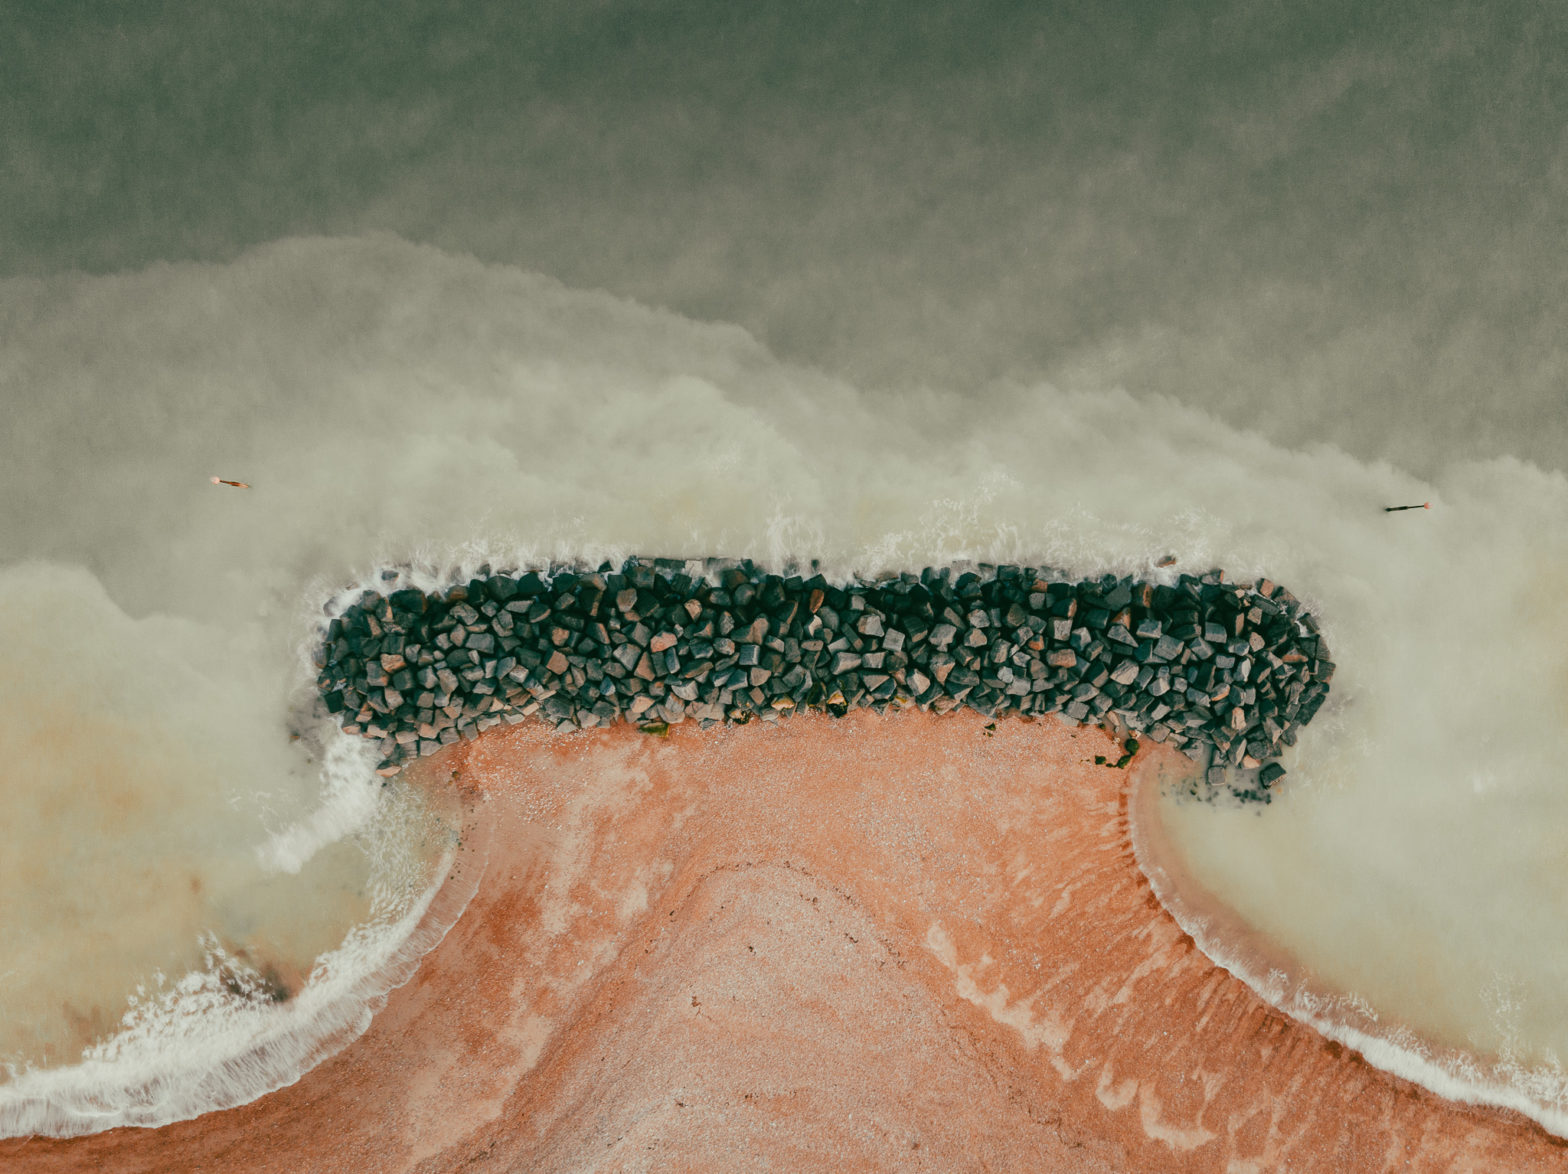 Top down view of a wave breaker by the beach constructed of large dark stones